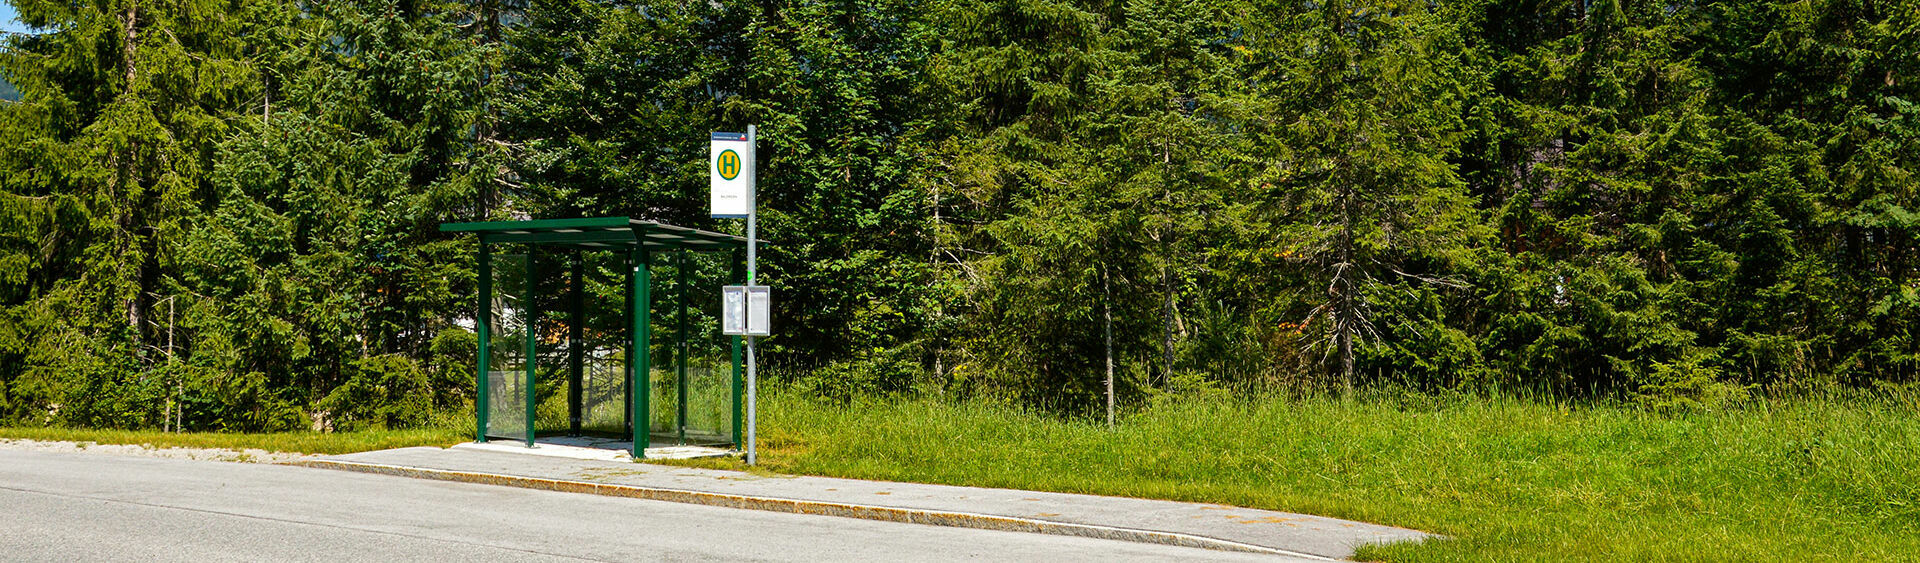 The AchenseeCard allows free use of the public buses which run at regular intervals between the villages of Achenkirch, Maurach, Pertisau, Steinberg, Wiesing and Jenbach. 